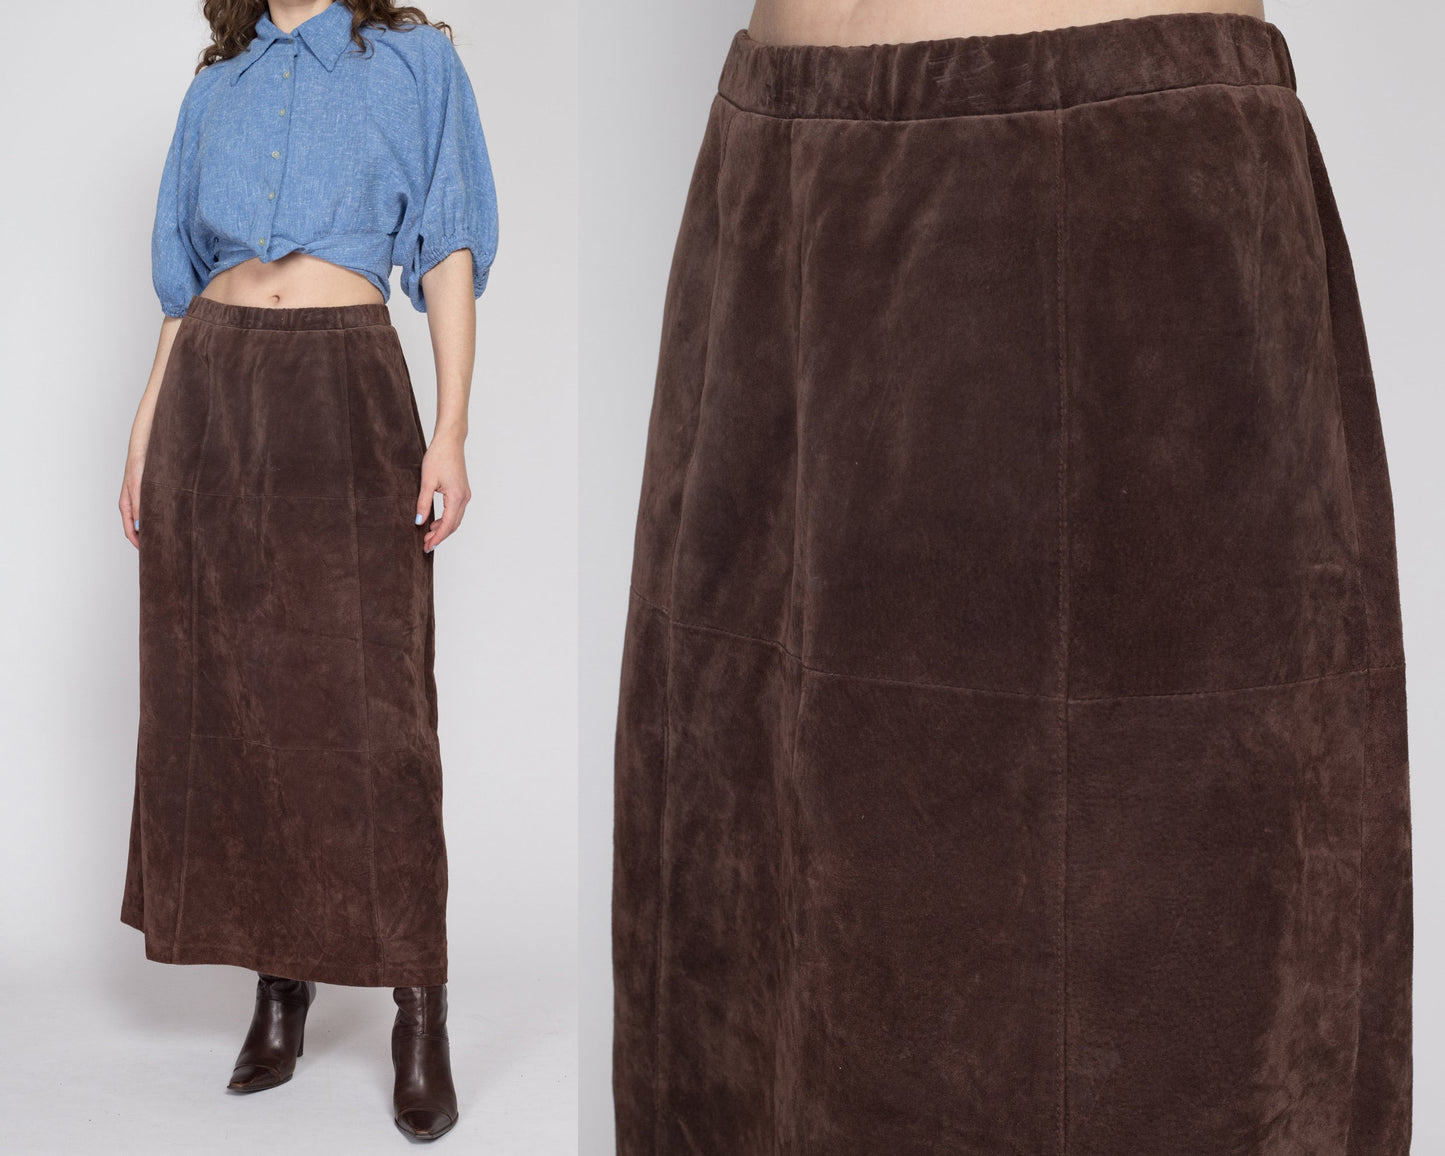 Med-Lrg 90s Chocolate Brown Suede Maxi Skirt 28"-31" | Vintage Boho Leather High Waisted Western Skirt